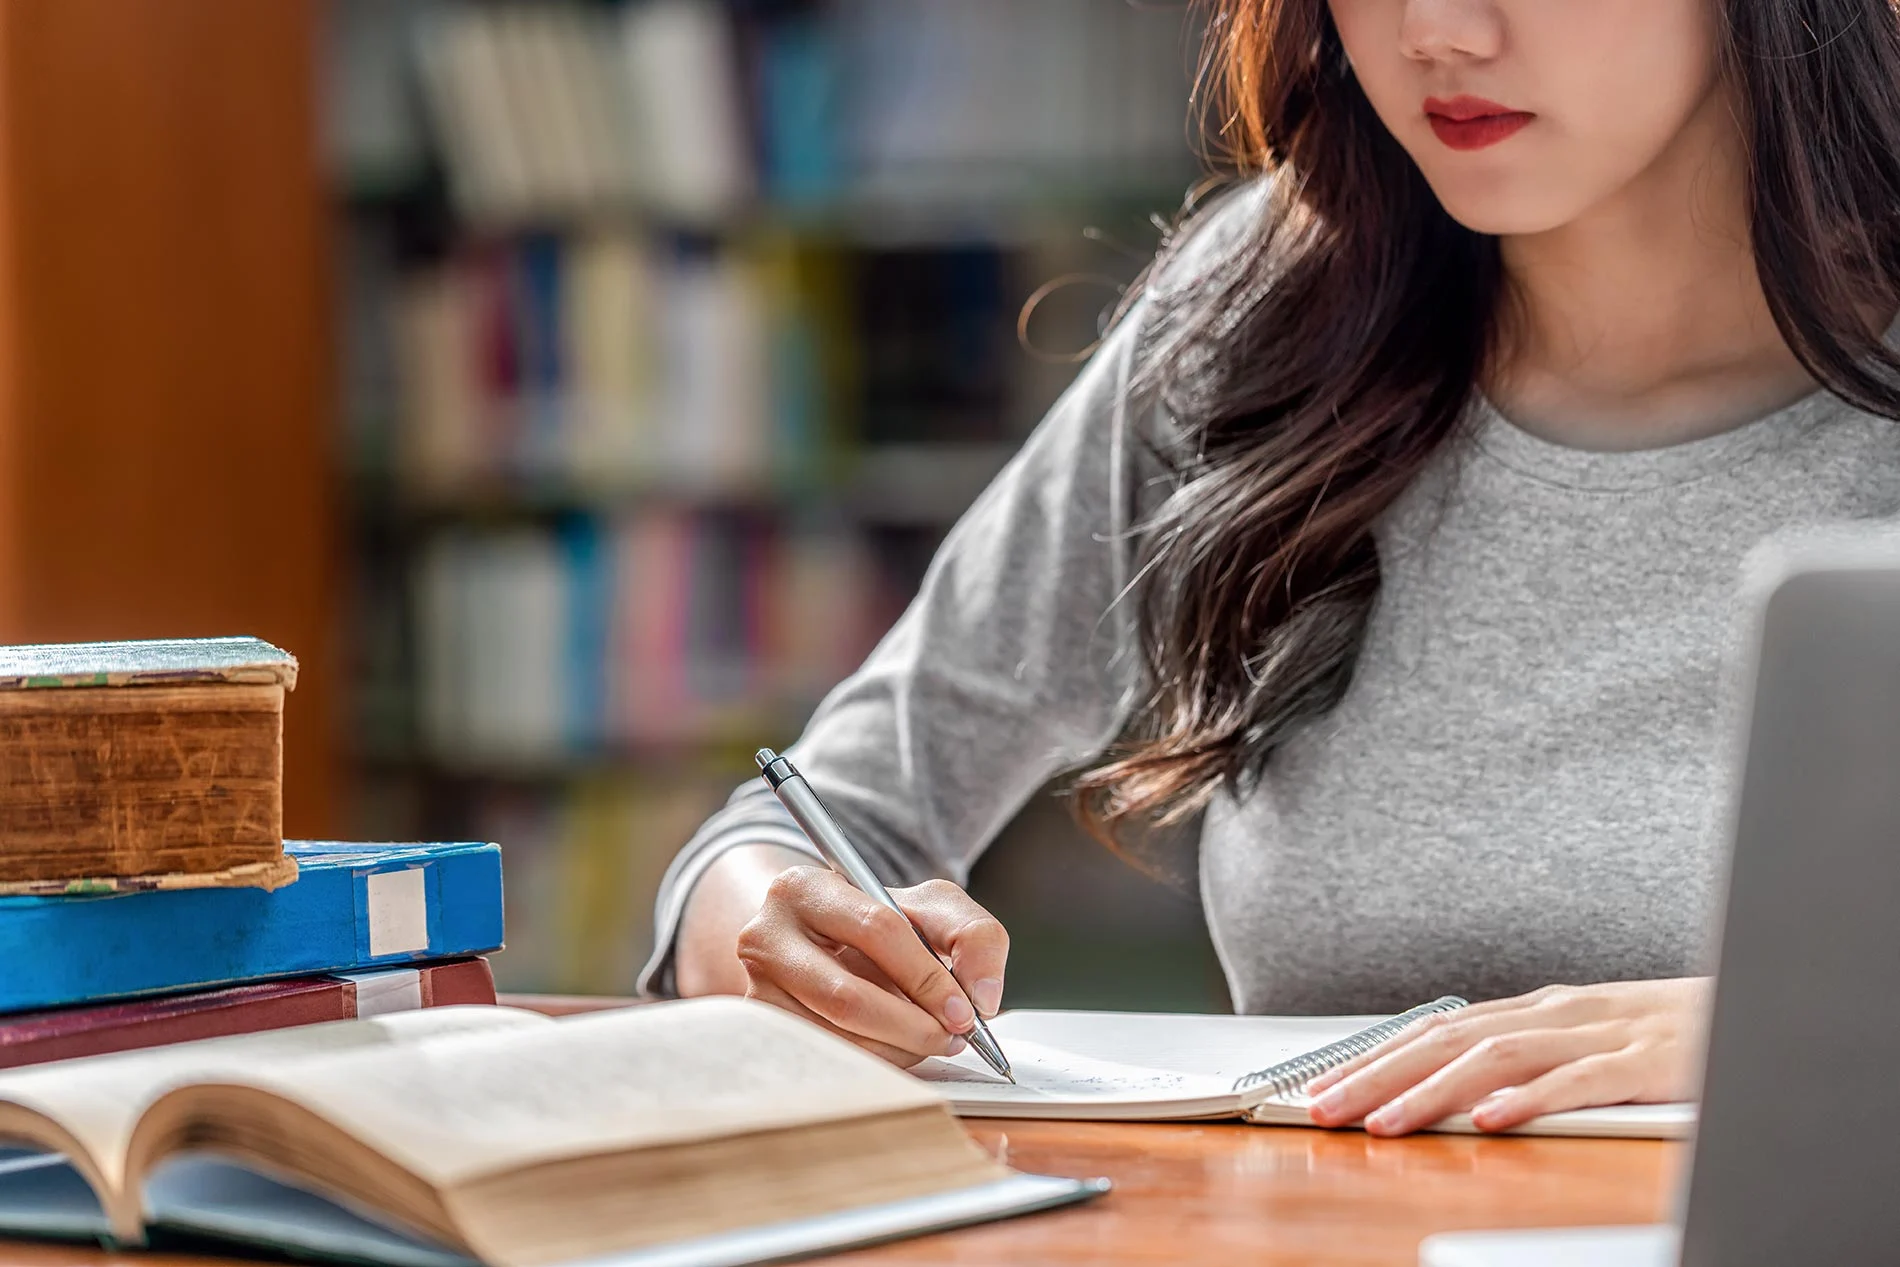 Custom Essay Writing Service: When Should Students Use It?